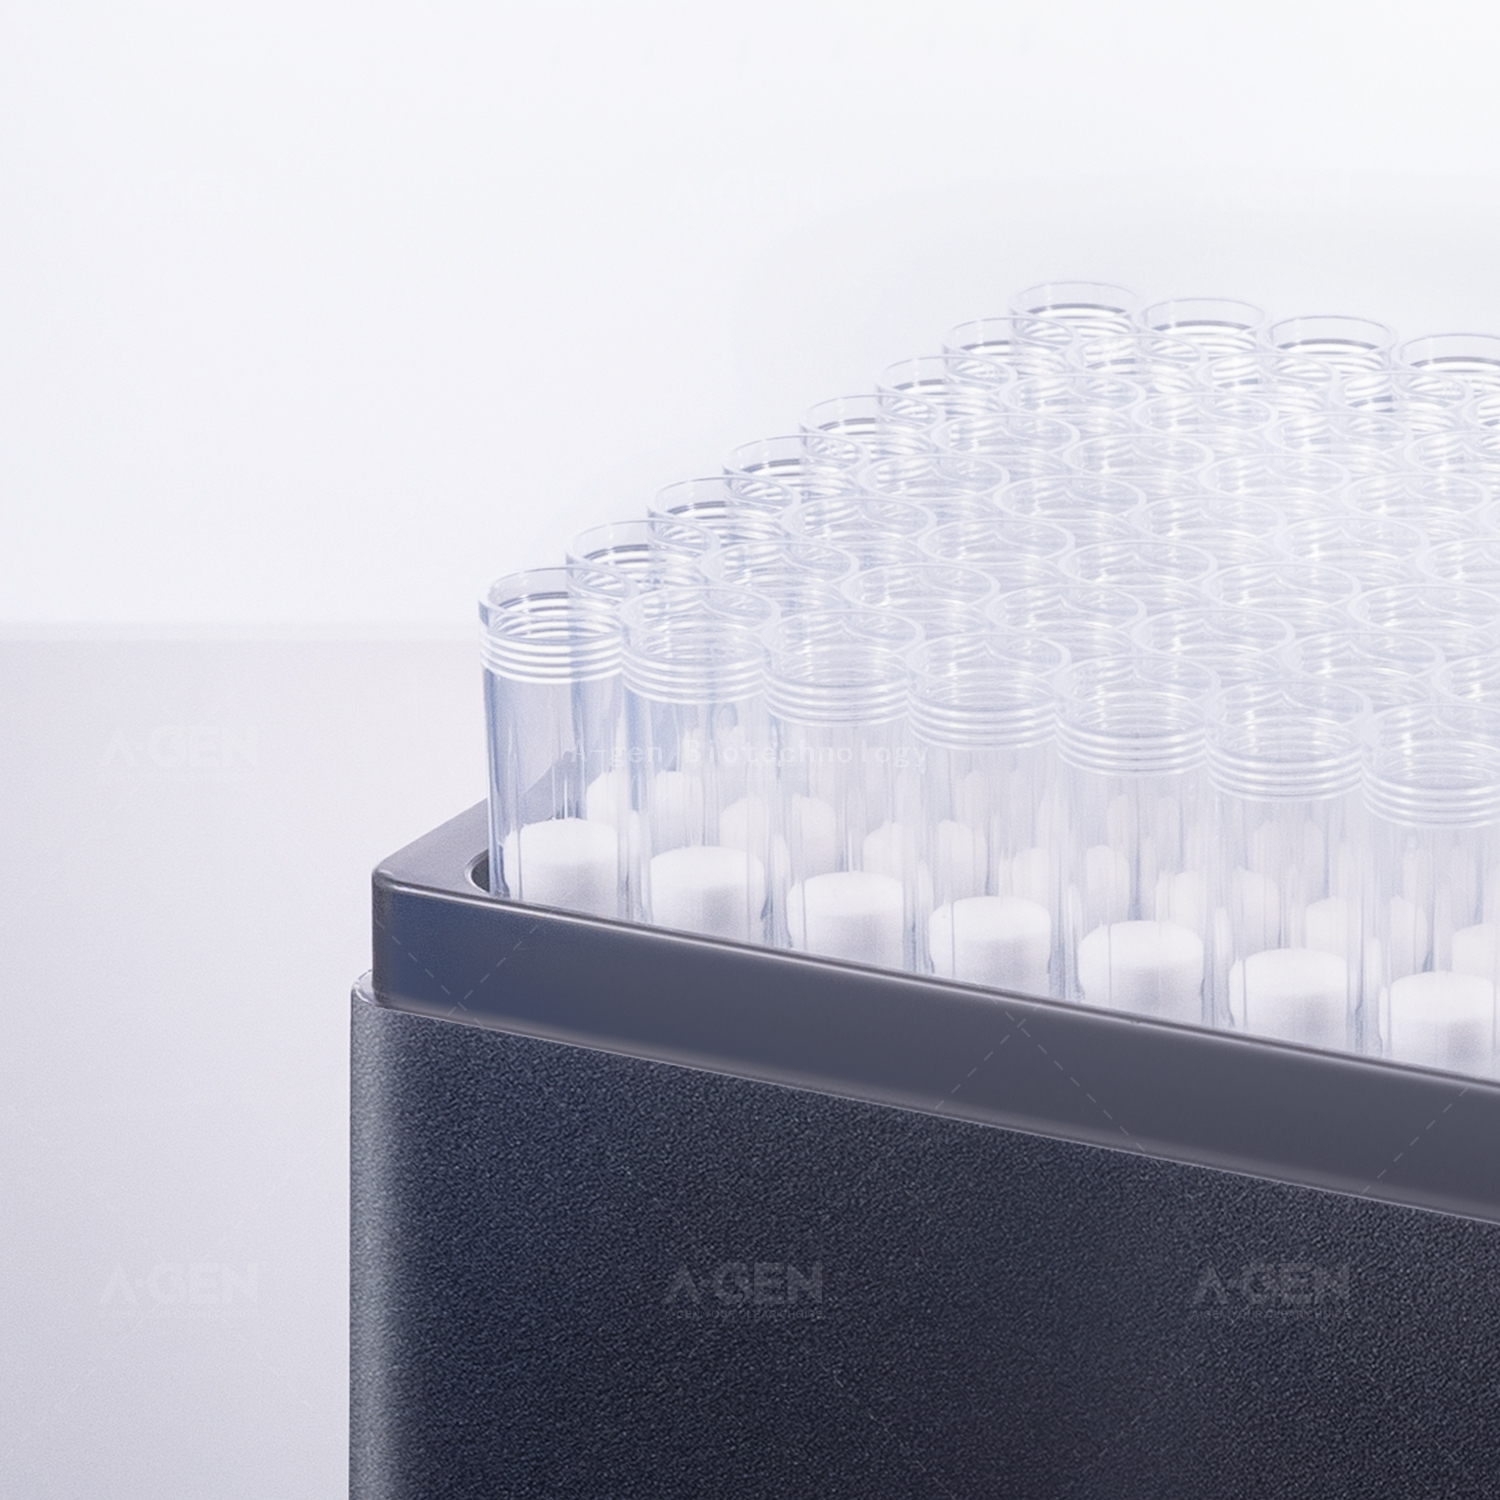 Opentrons Filter Pipette Tip Clear 1000μL PP Pipette Tip (Racked,sterile) for Lab Use With Filter OPTF-1000-RSL Low Retention Is Optional